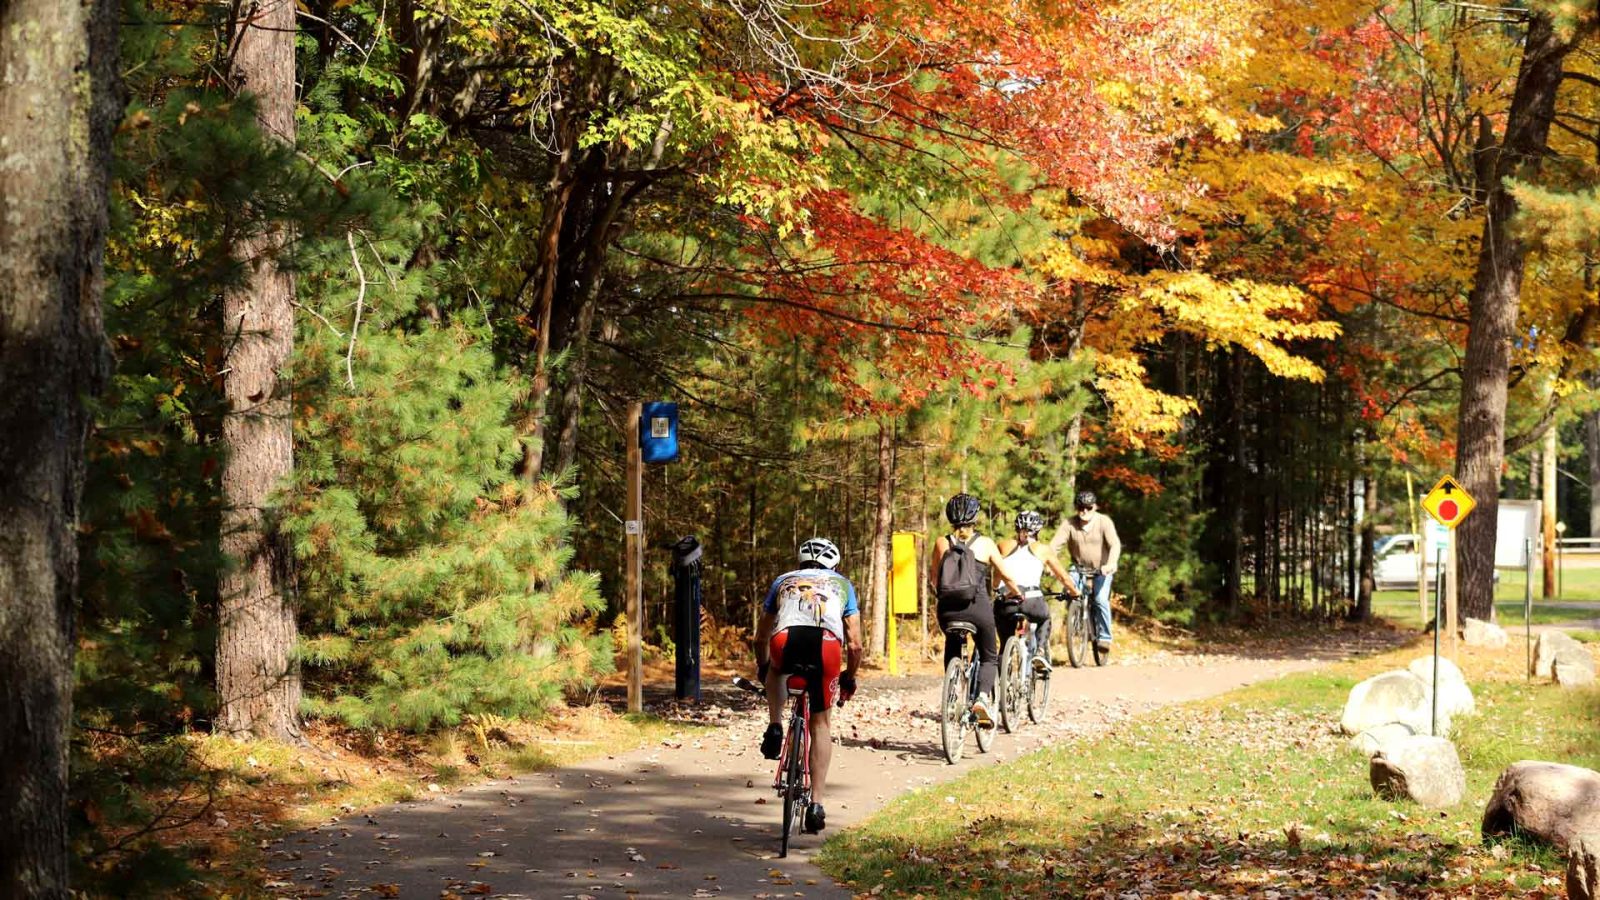 Cyclists riding through a fall forest